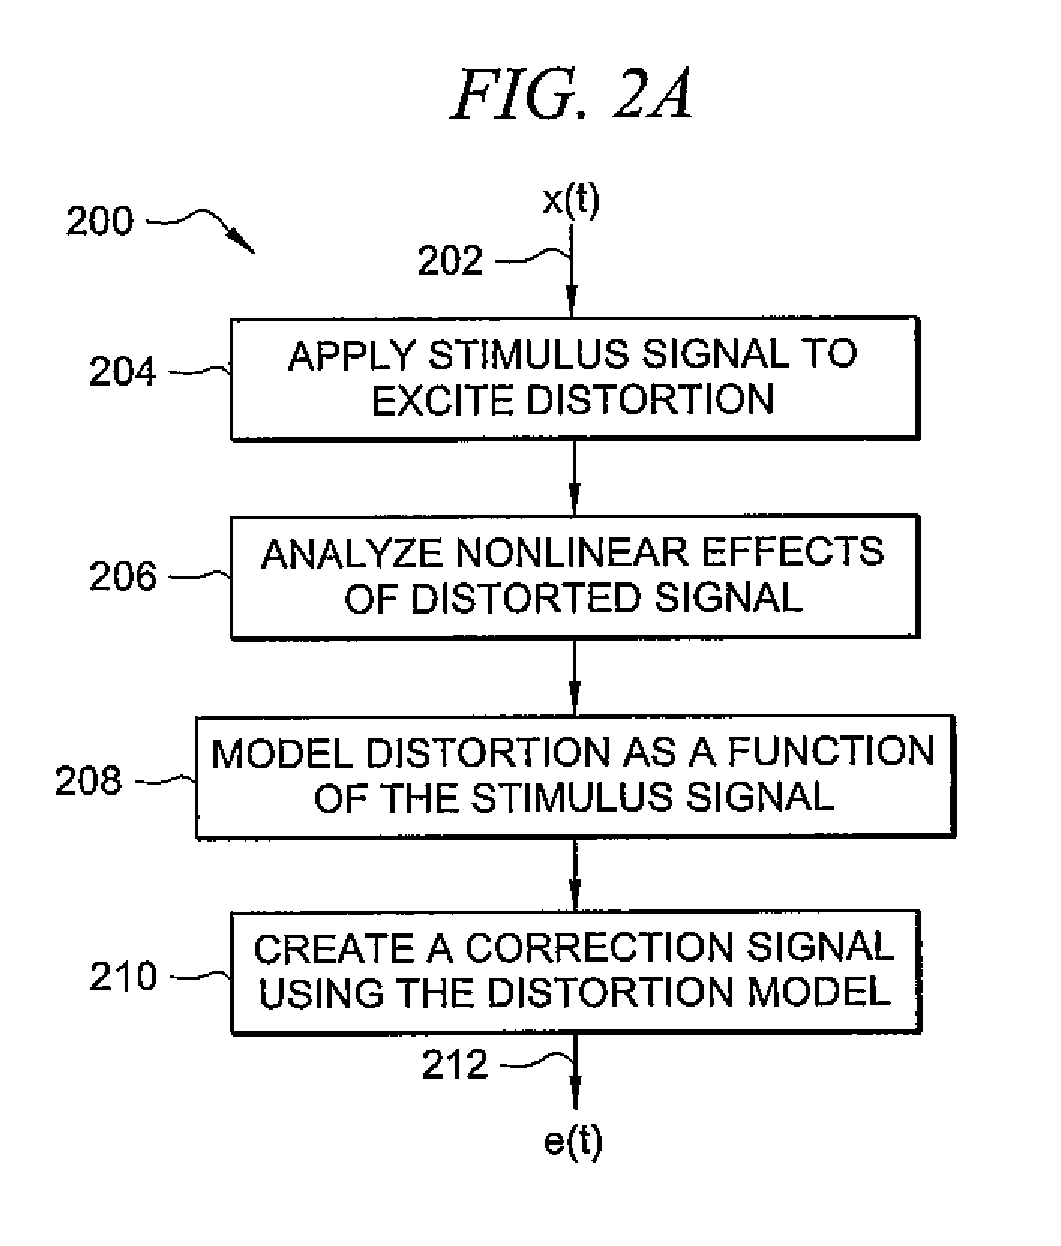 System and method of digital linearization in electronic devices